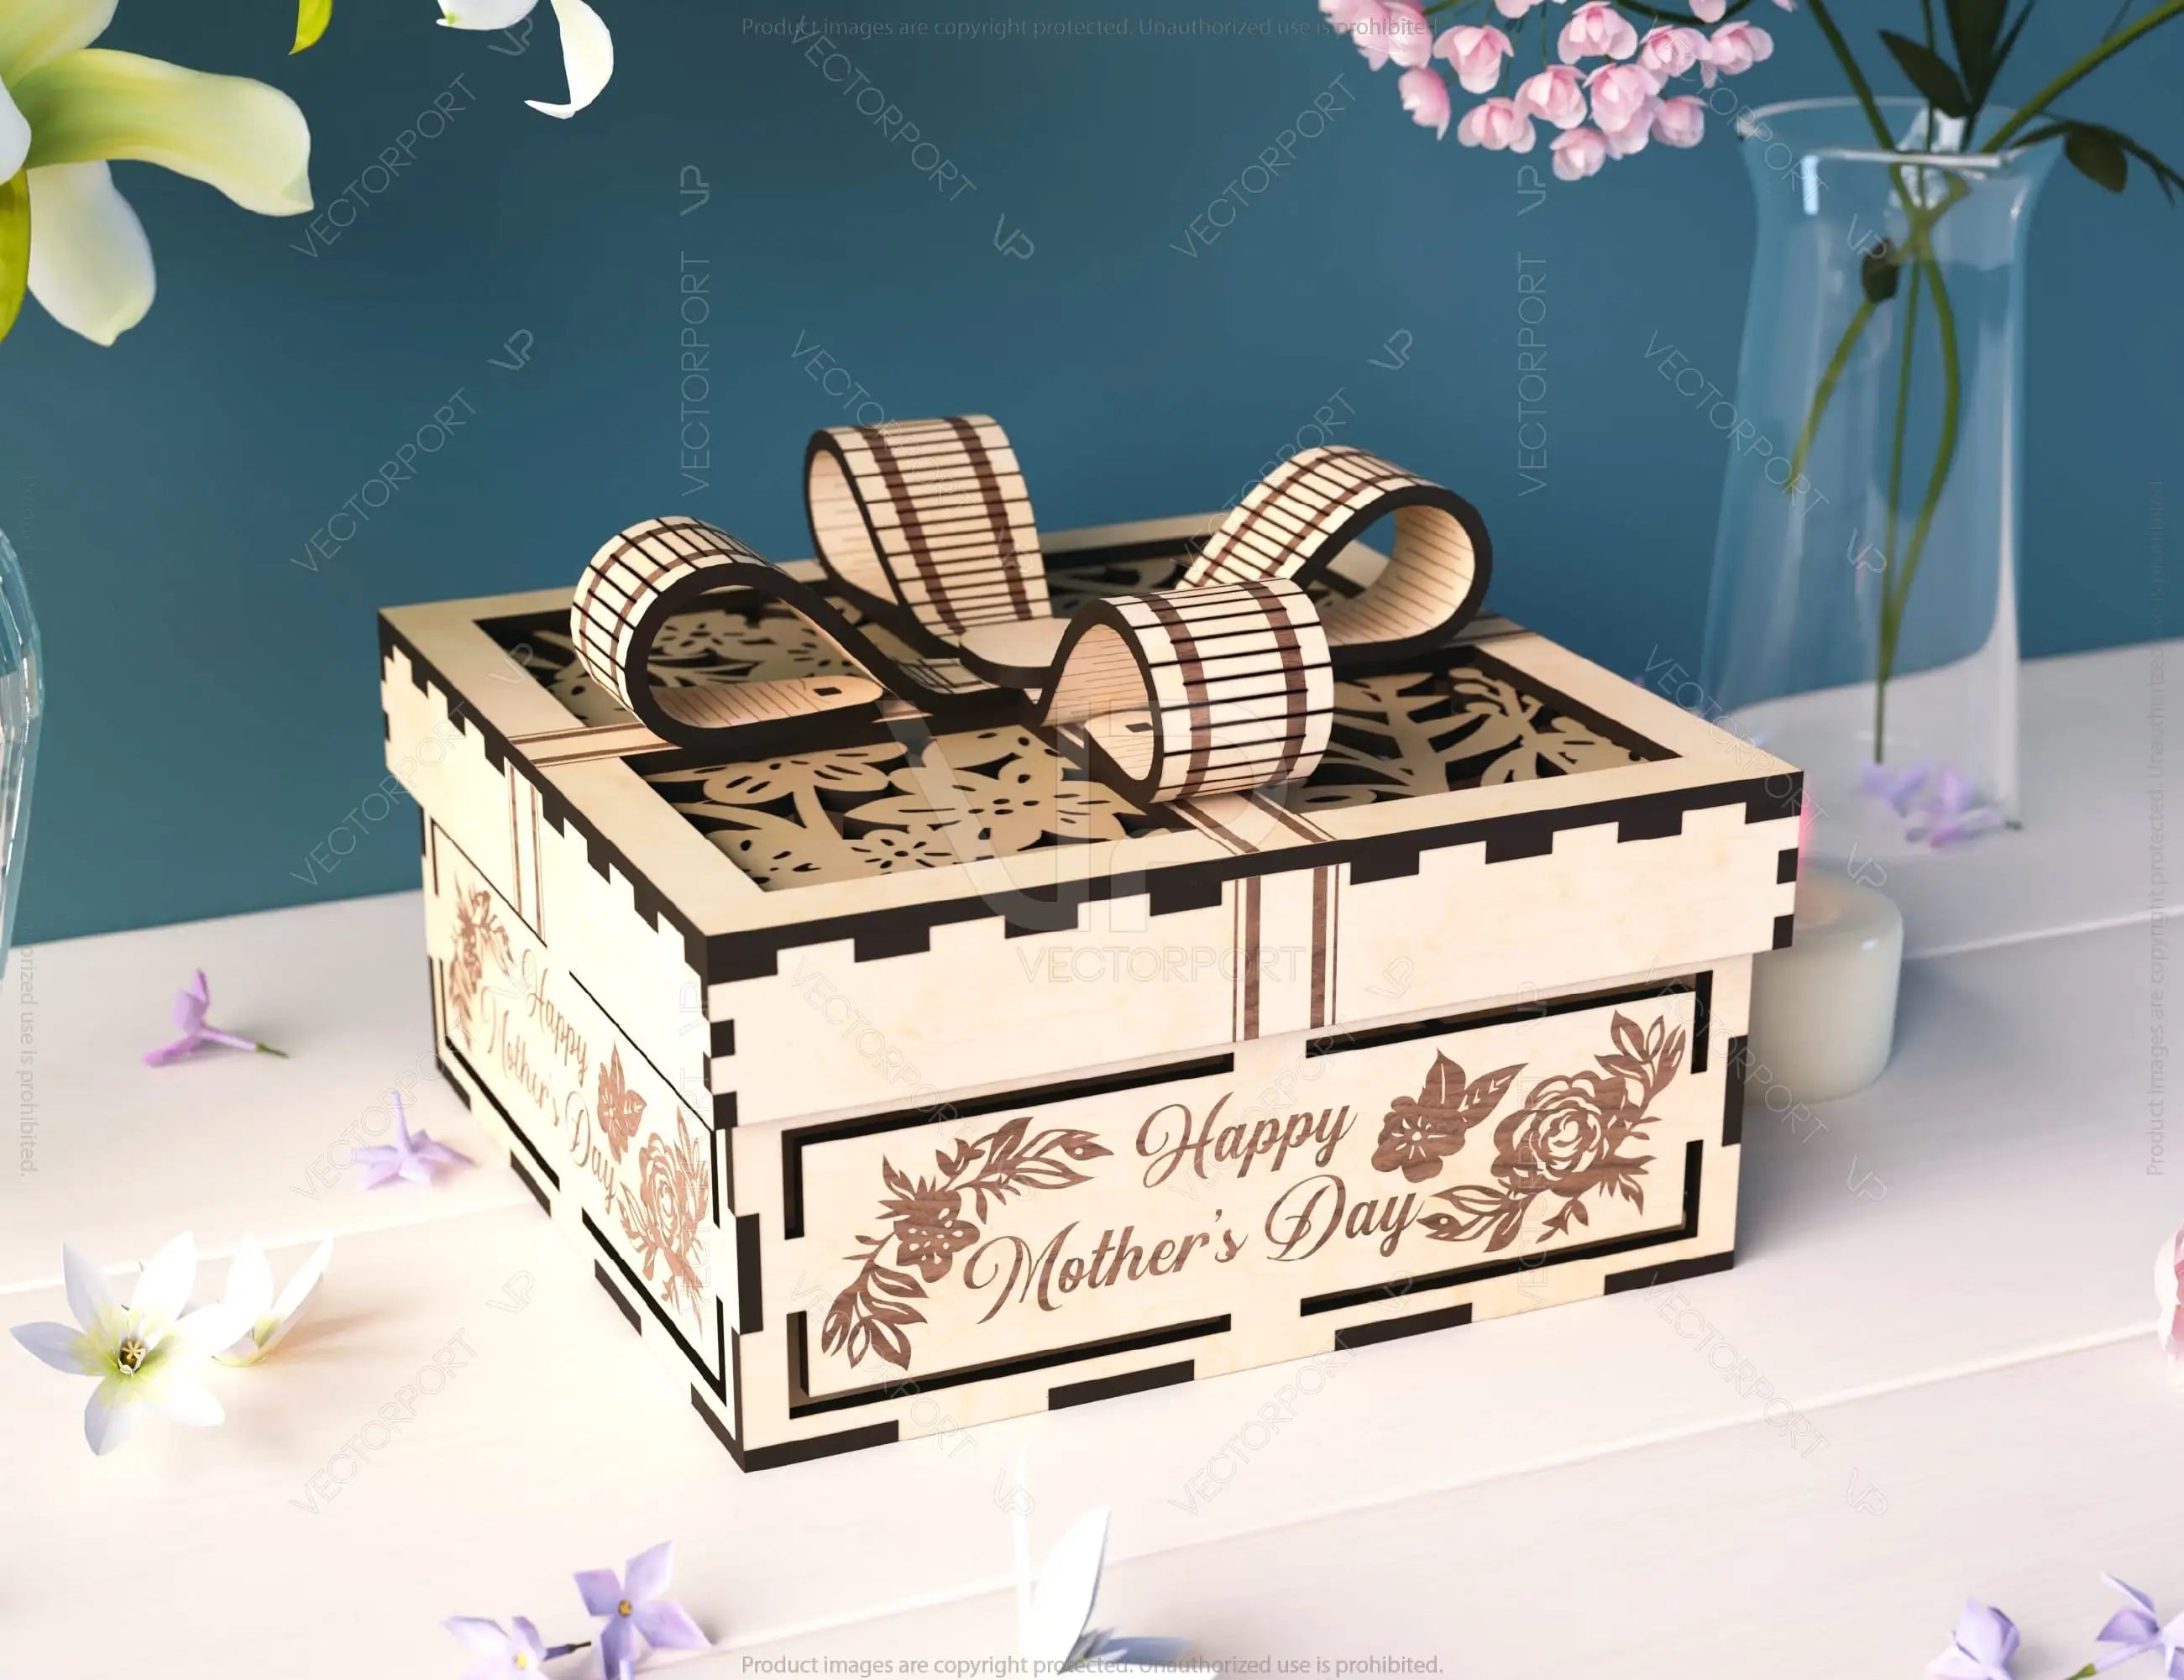 Personalized Wooden Gift Box with Engraved Design and Ribbon Closure, Wooden Opener engraved Card Case Favor Box Digital Downloads |#U404|